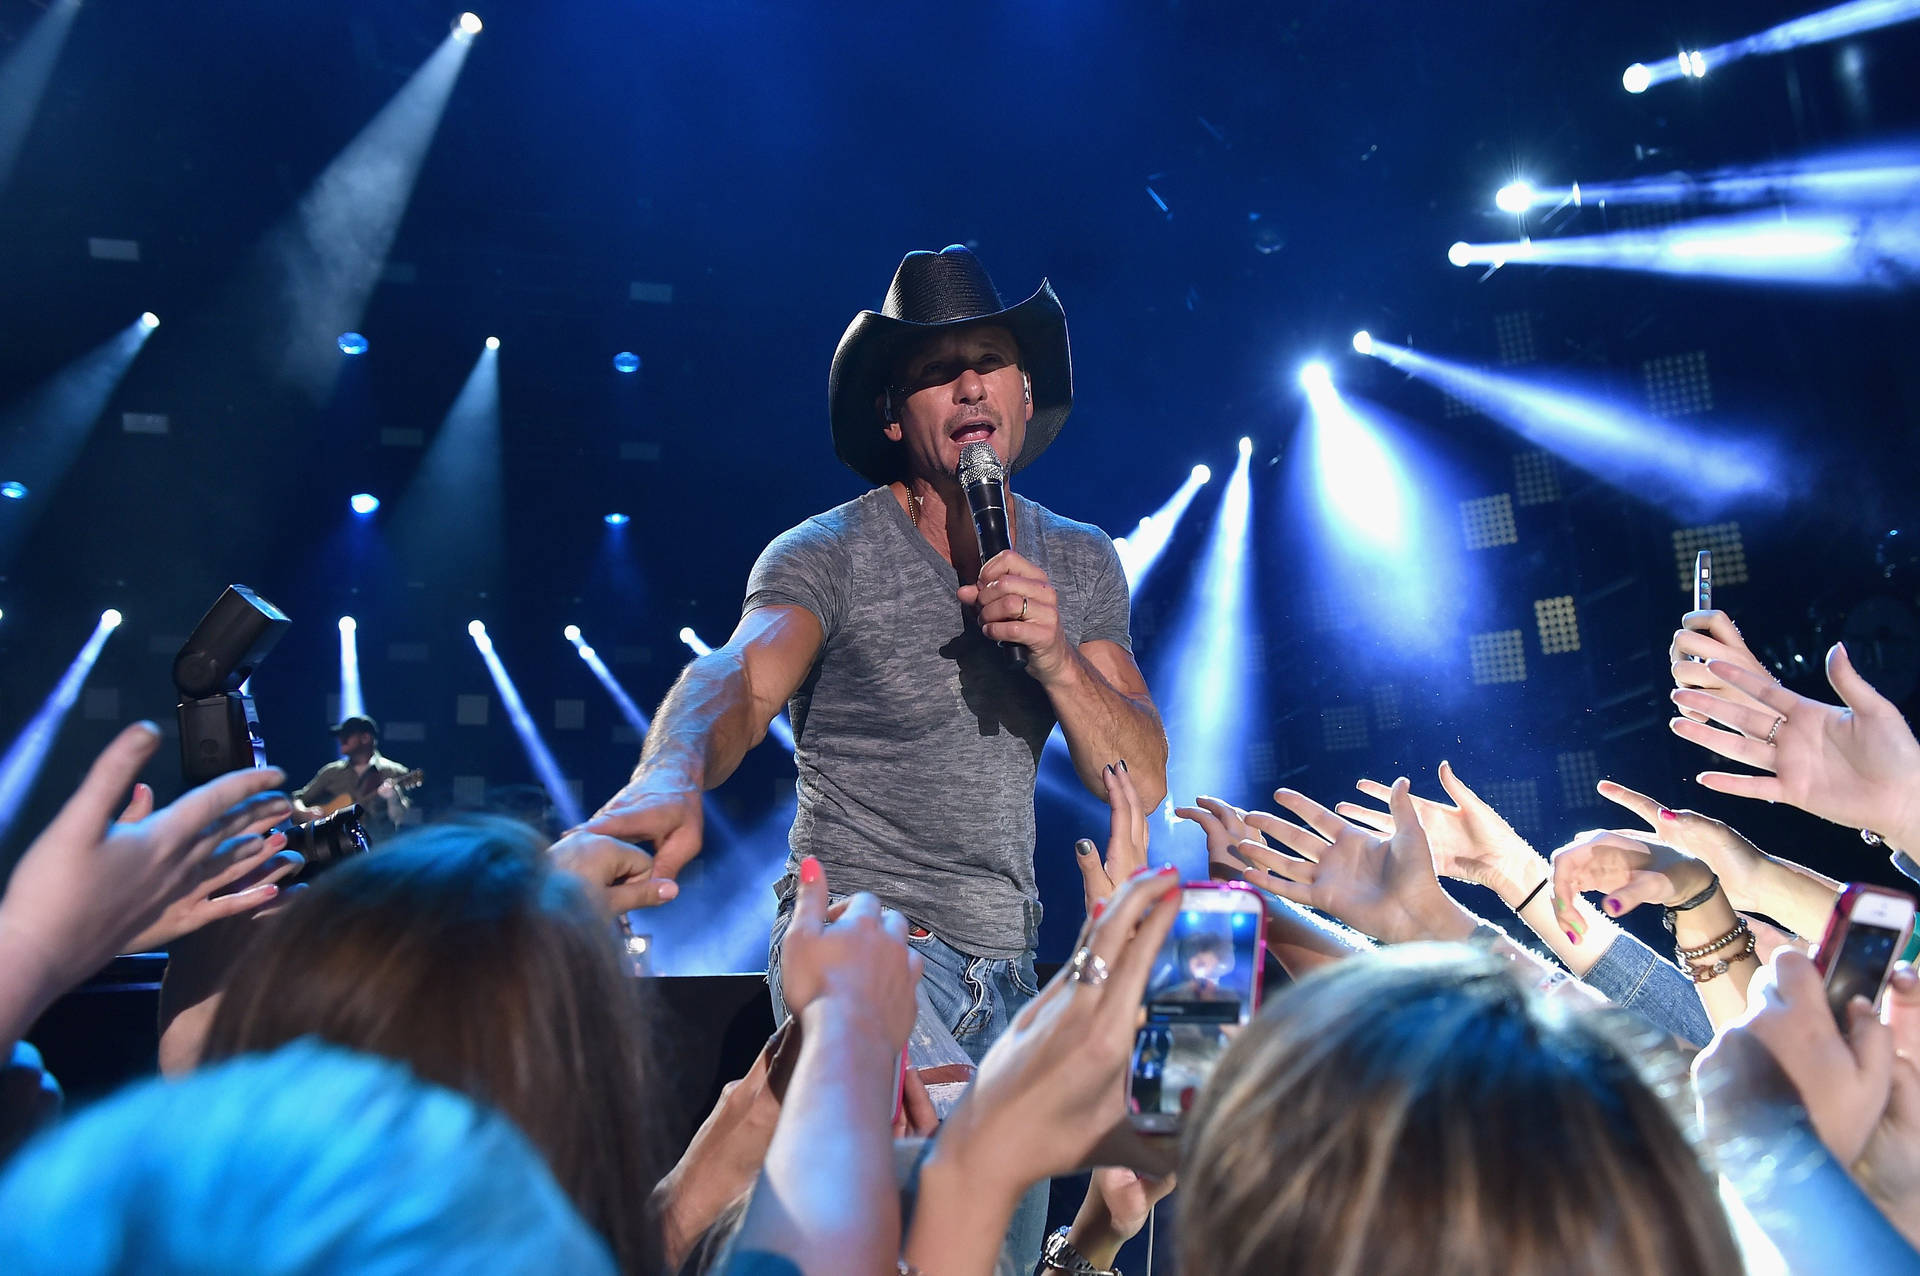 Tim Mcgraw Reaching To Fans Stage